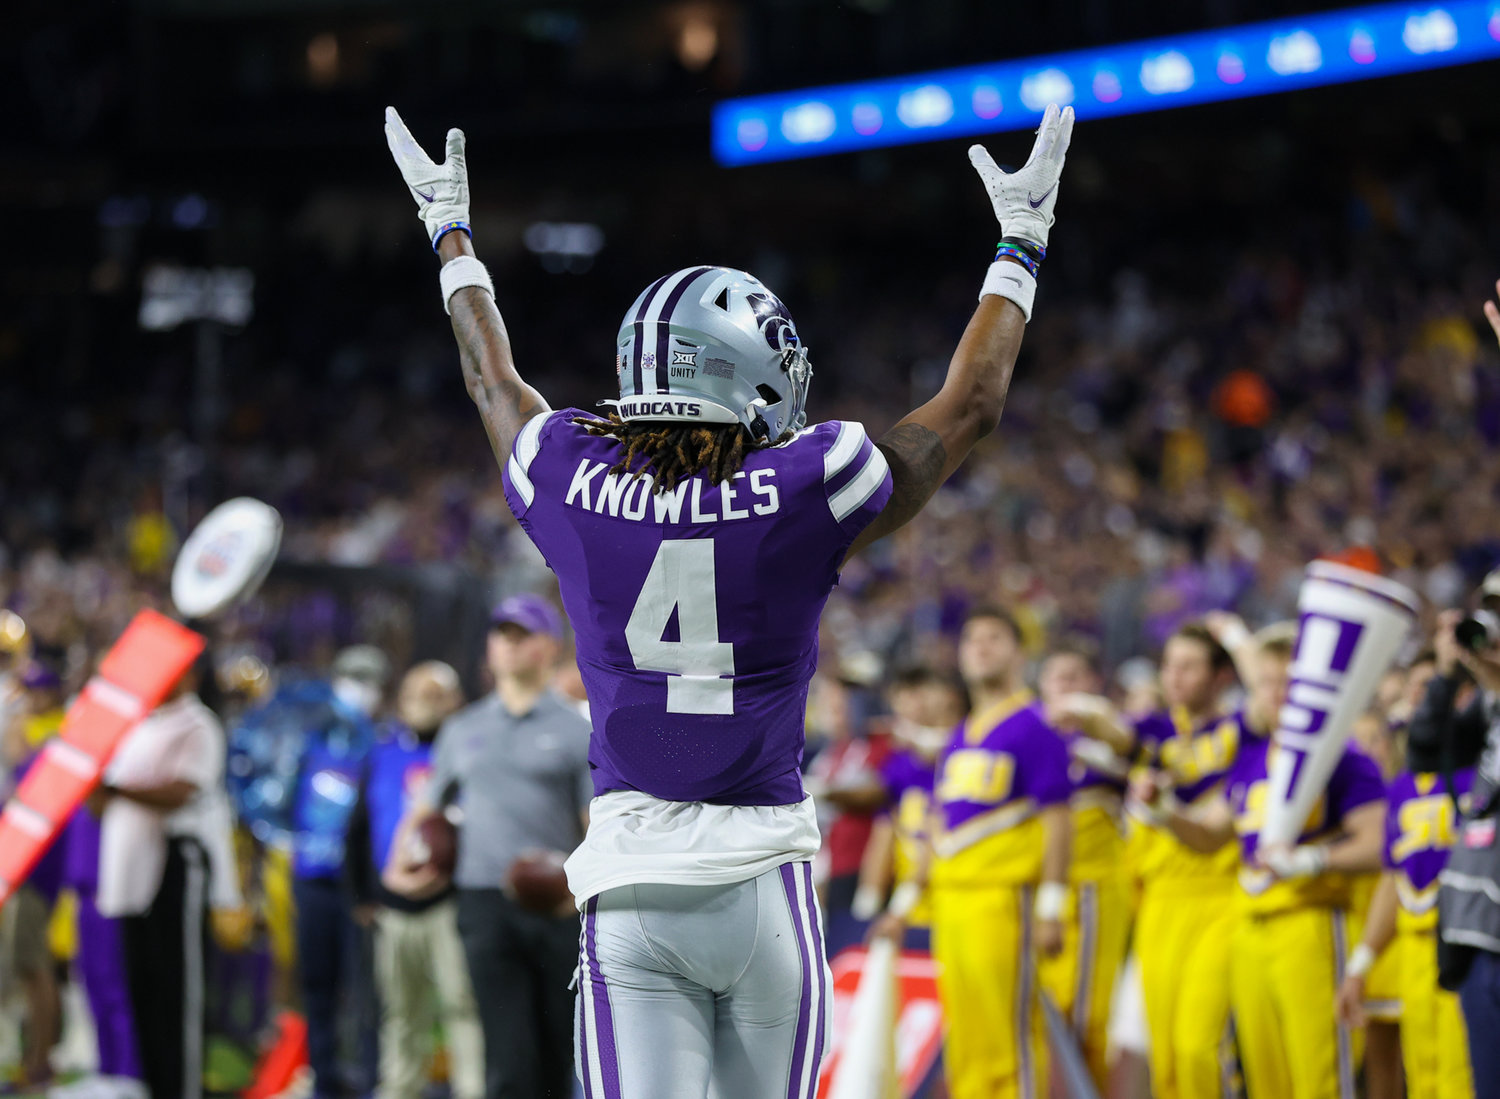 Kansas State Wildcats wide receiver Malik Knowles (4) gestures after a touchdown reception during the TaxAct Texas Bowl on Jan. 4, 2022 in Houston, Texas.